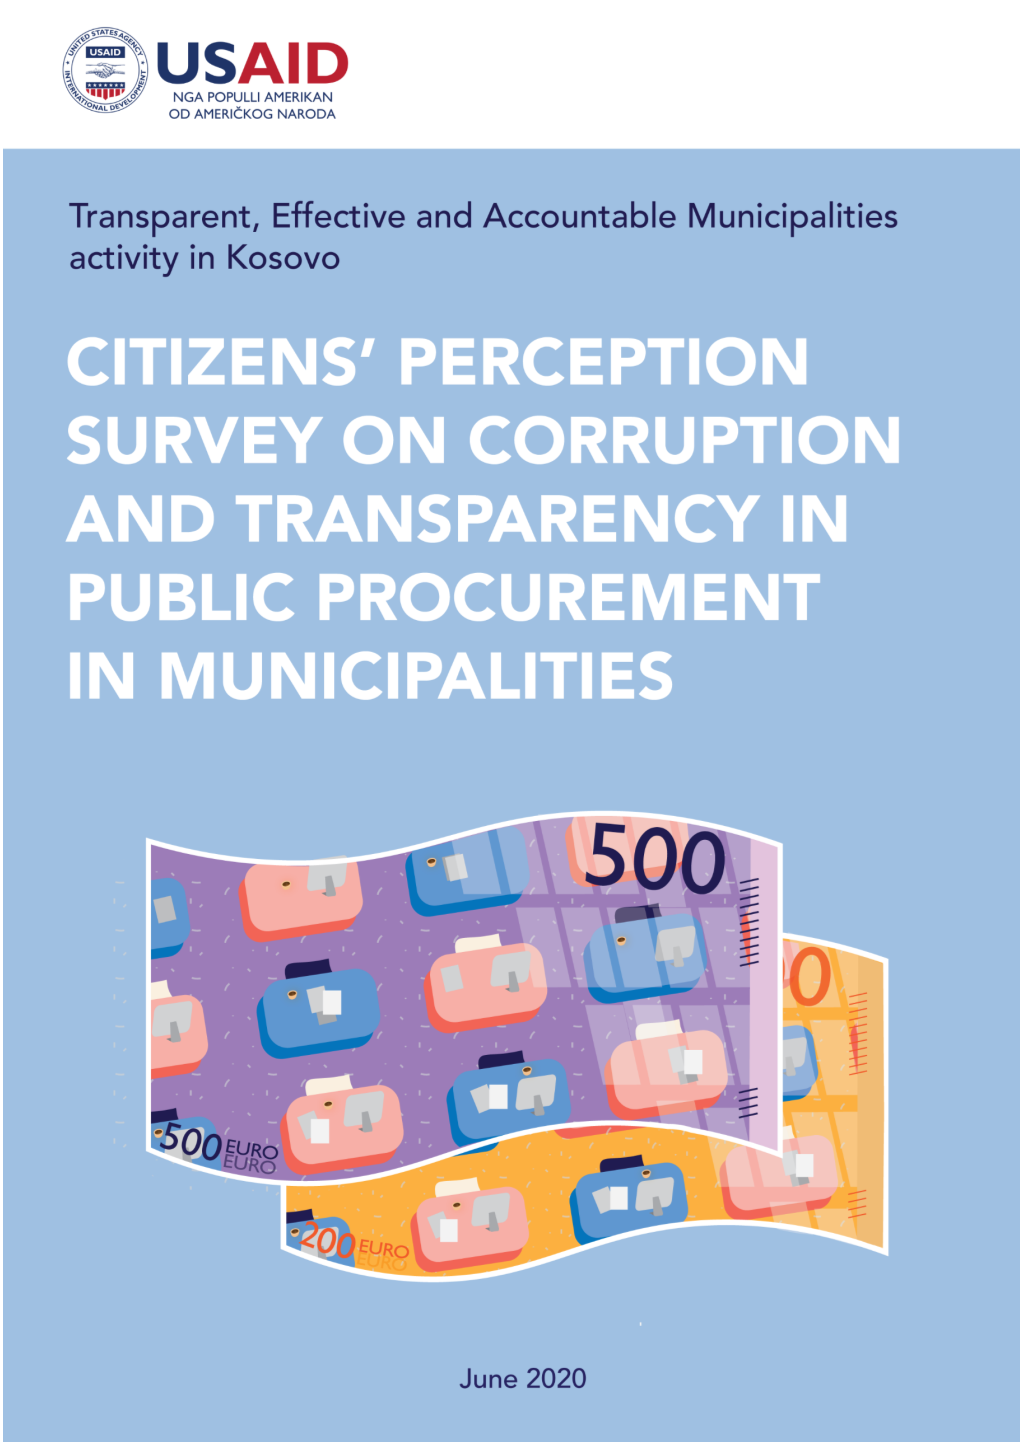 Citizens' Perception Survey on Corruption and Transparency In